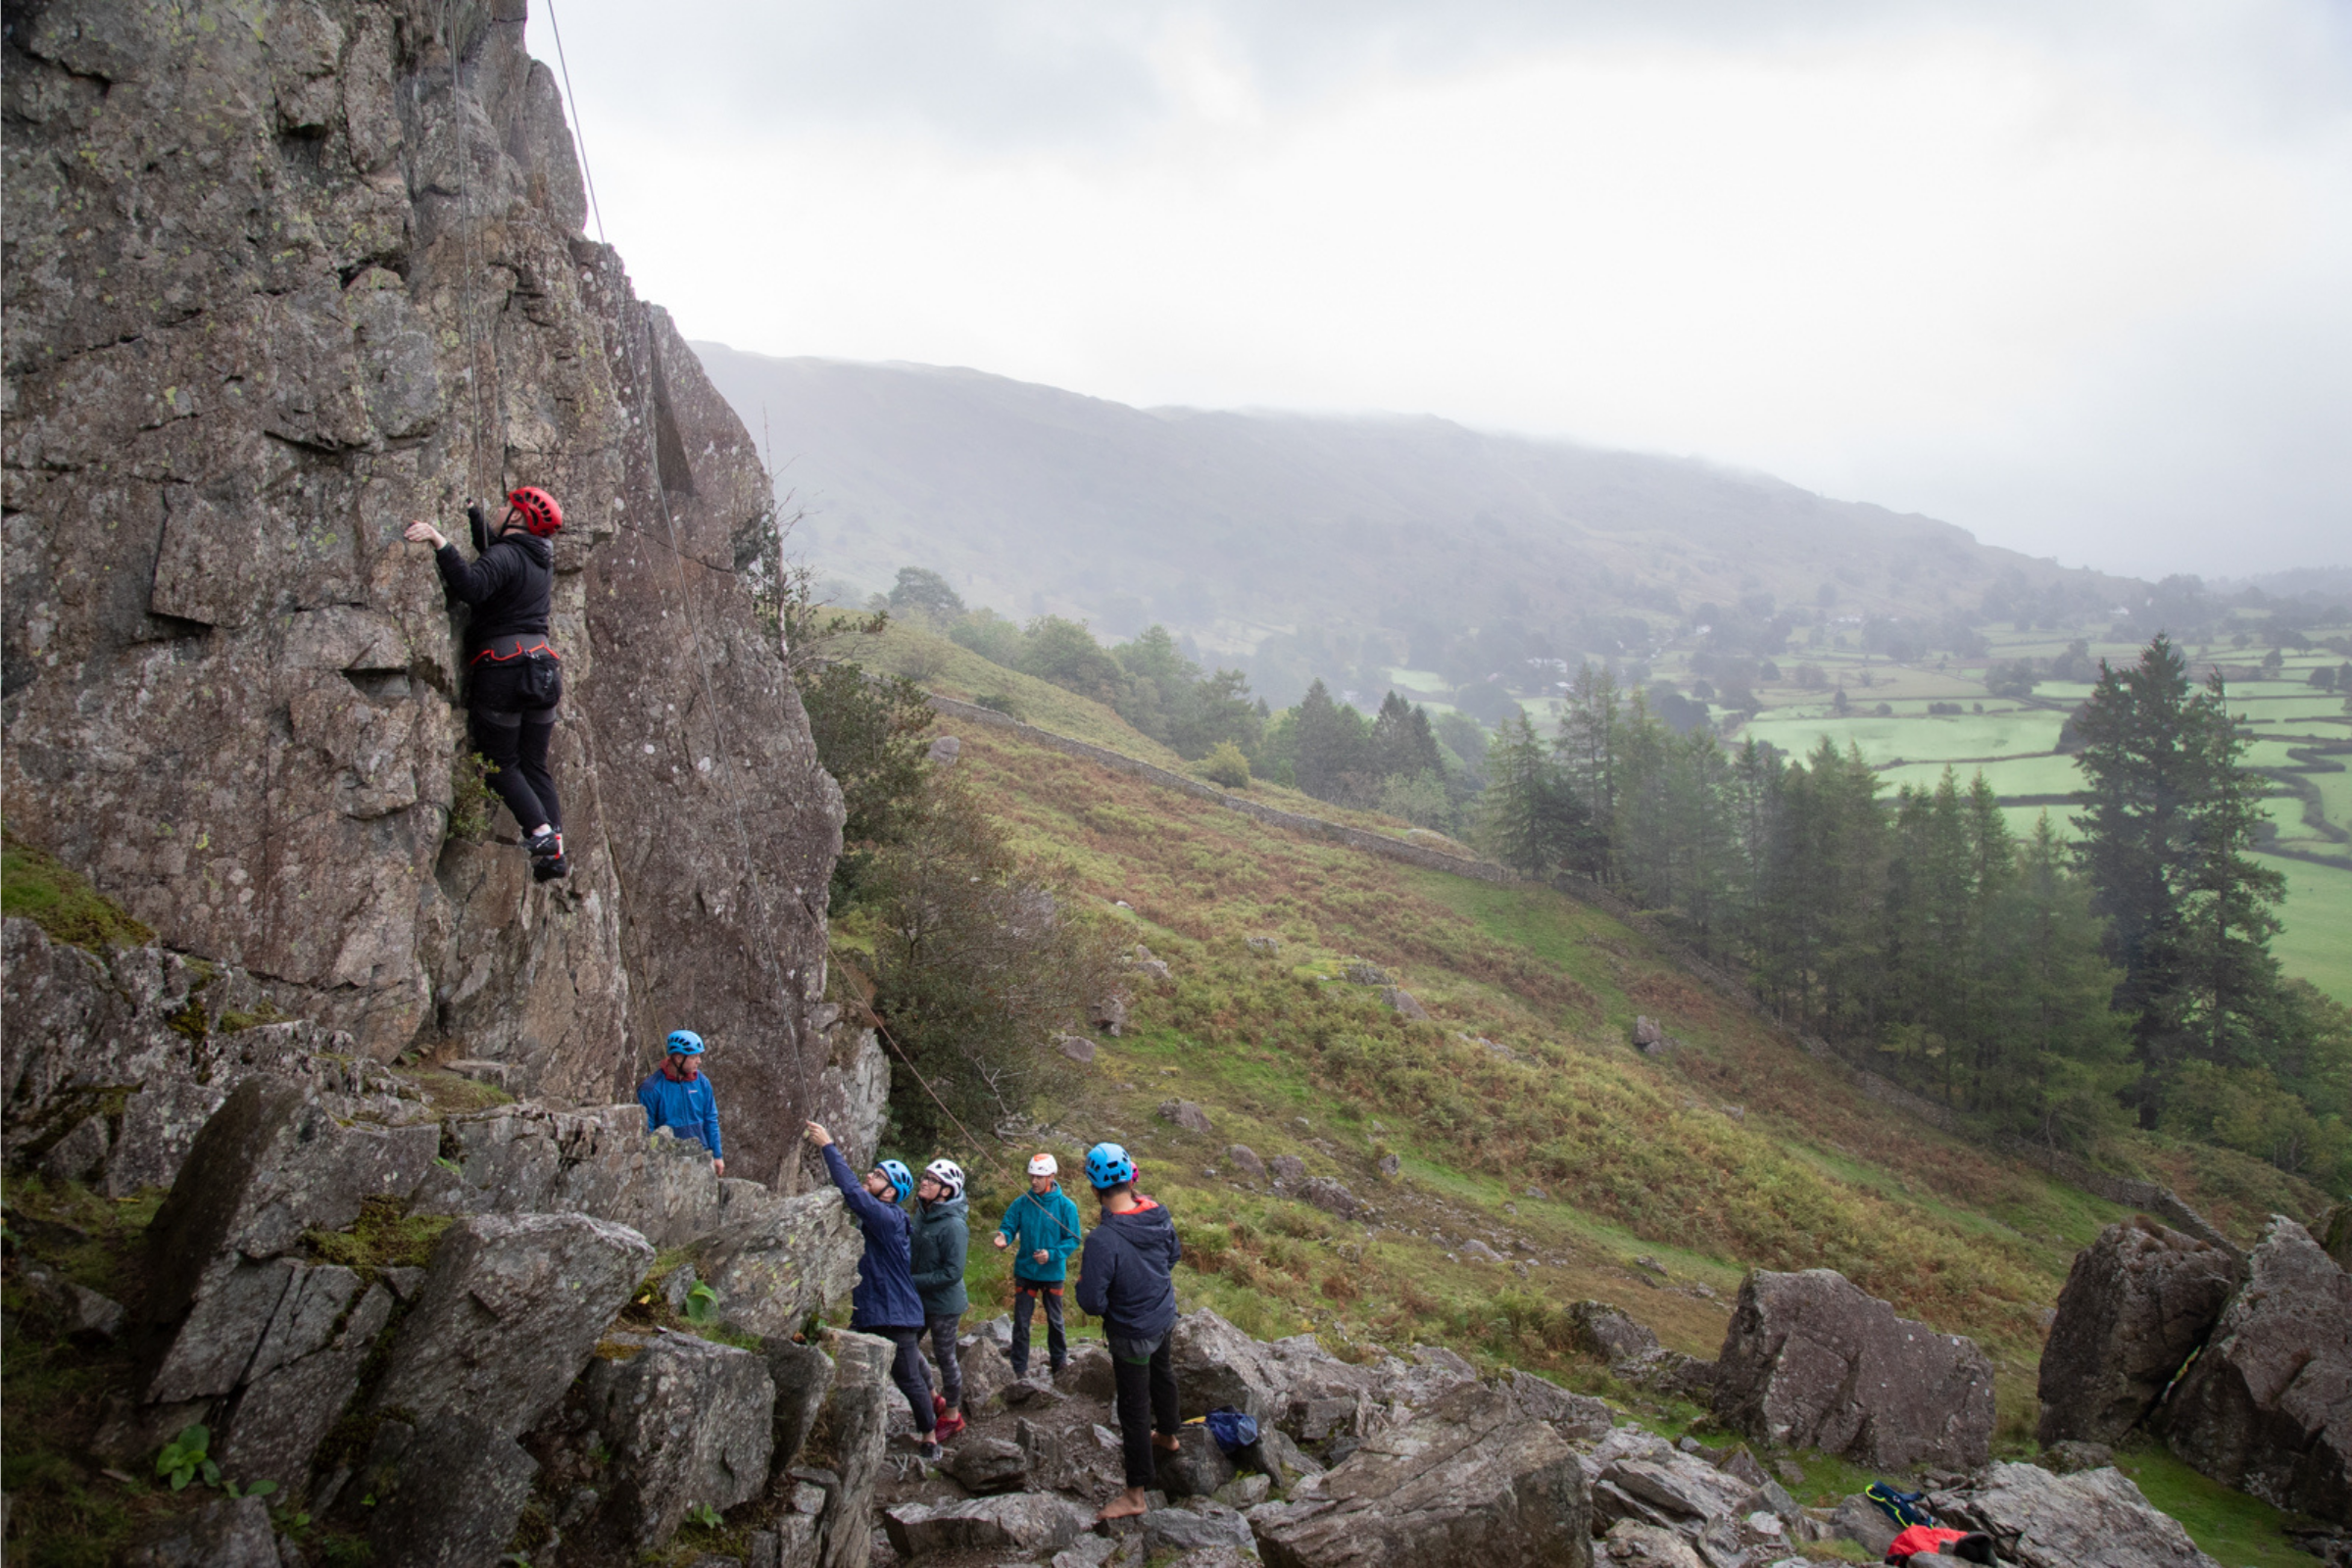 Book now for the Arc’teryx Academy’s Climb Lake District 